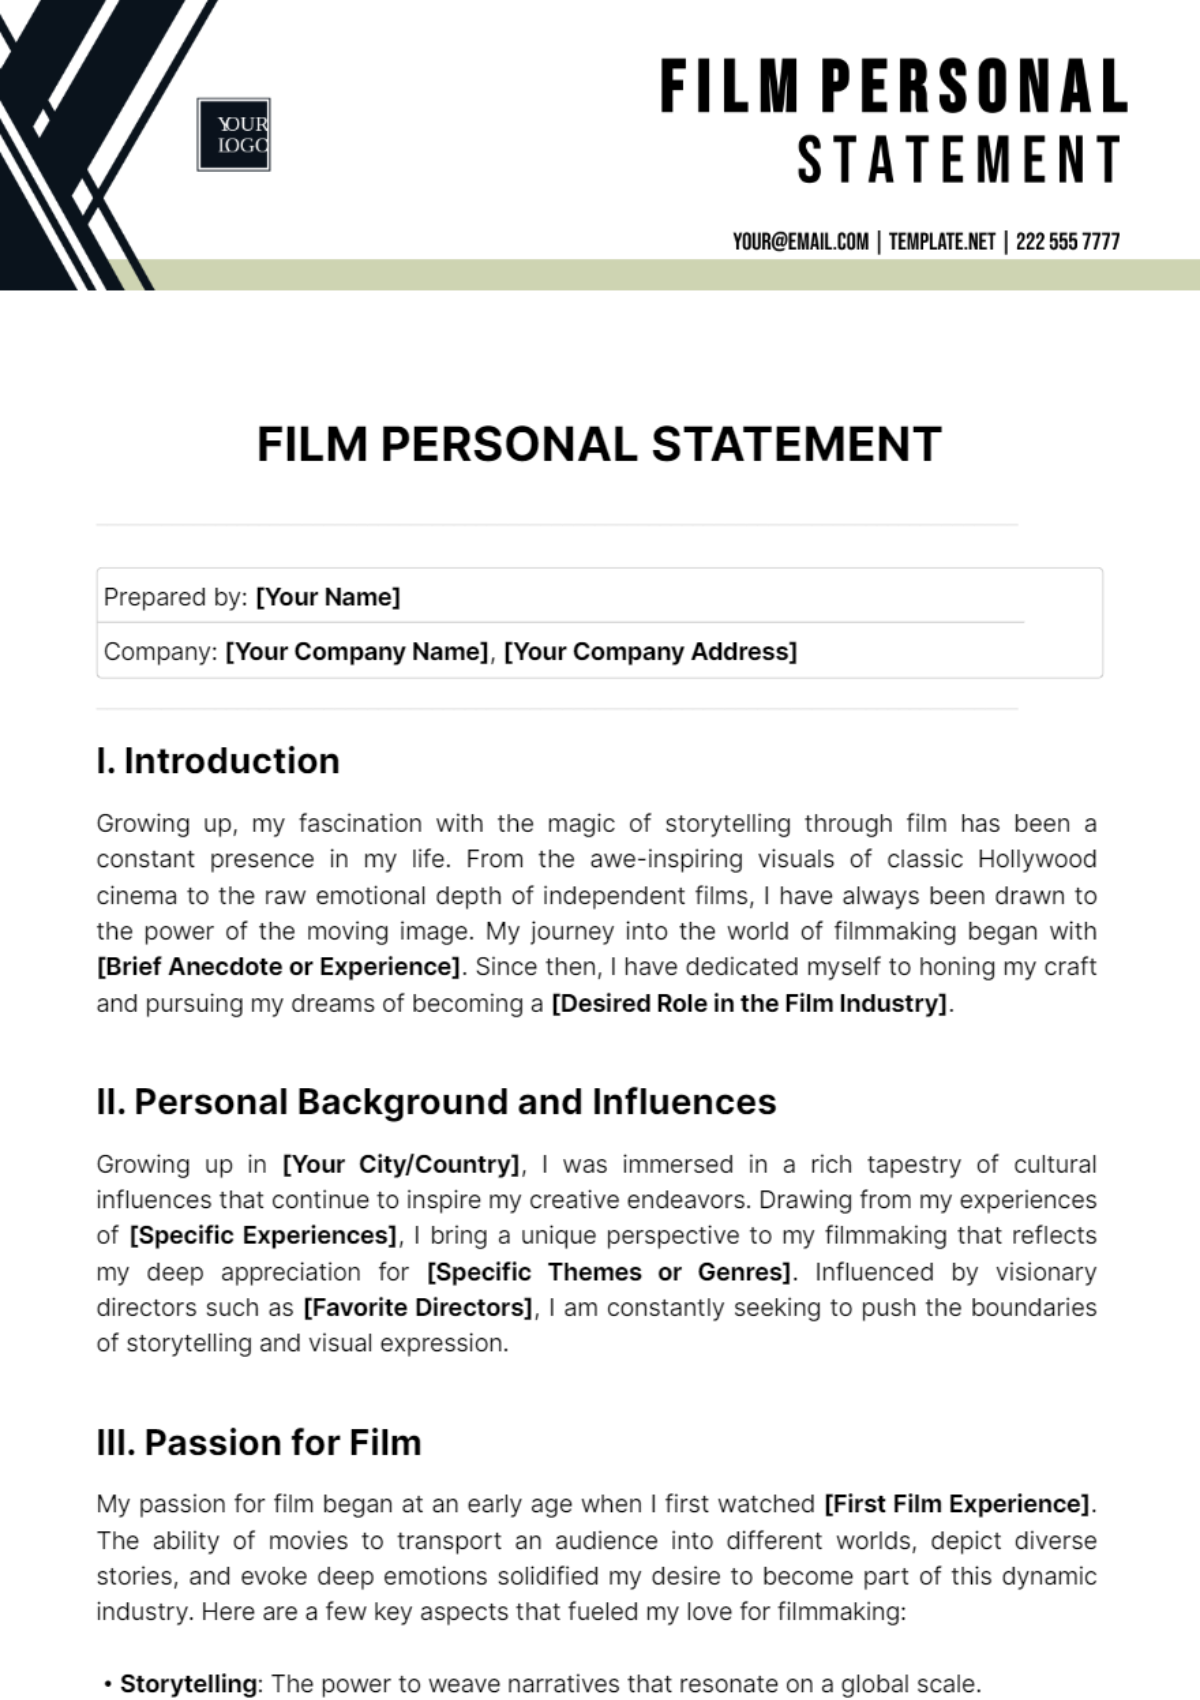 Free Film Personal Statement Template